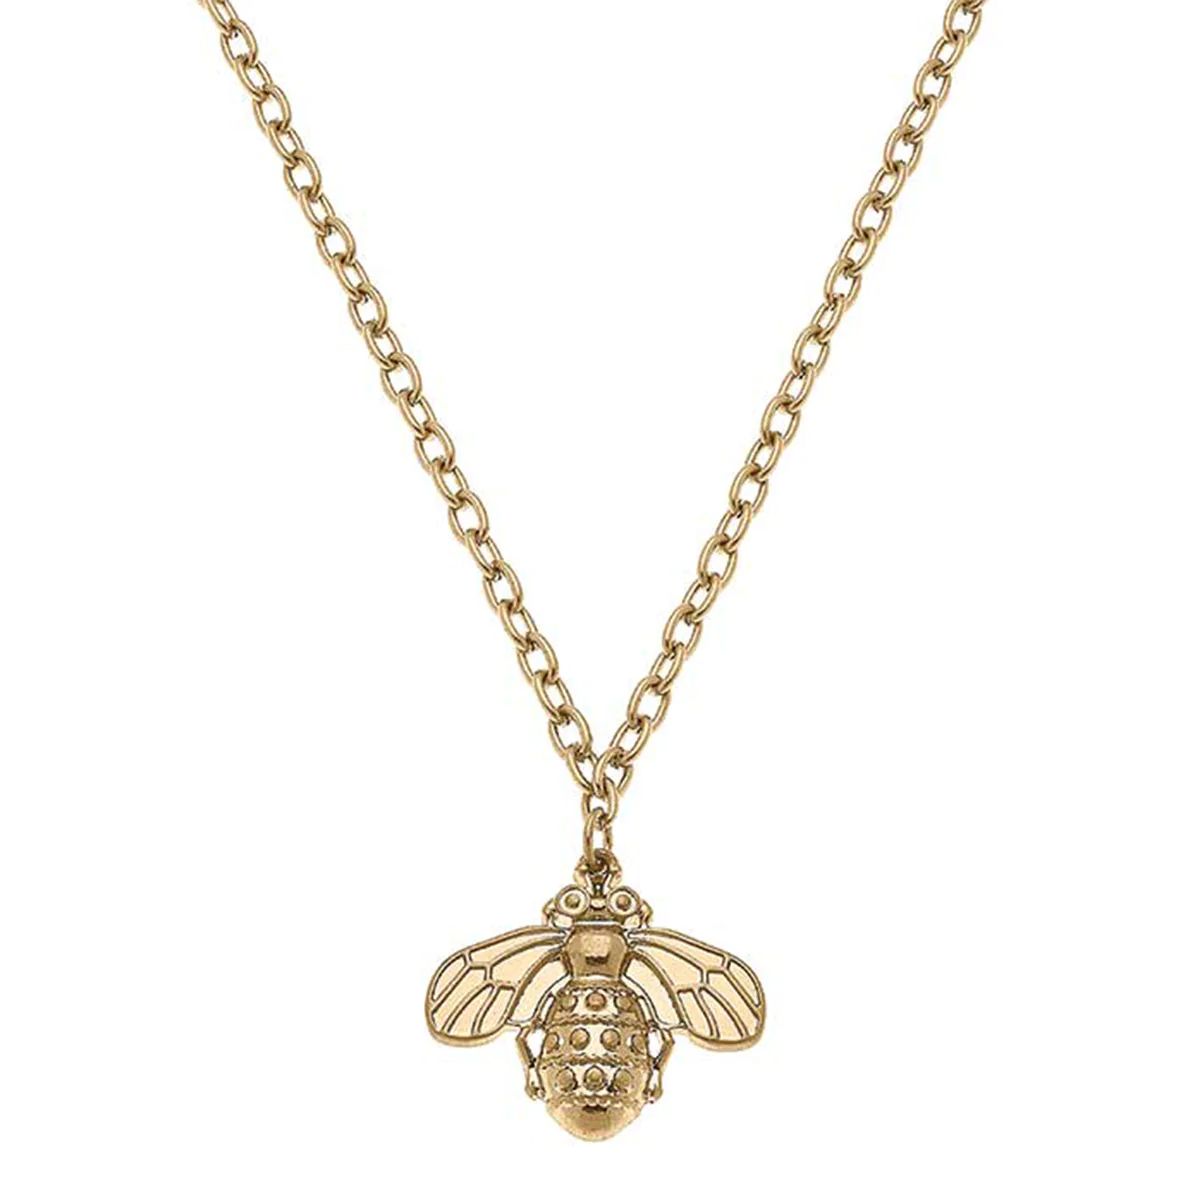 Helena Bee Charm Necklace in Worn Gold | CANVAS